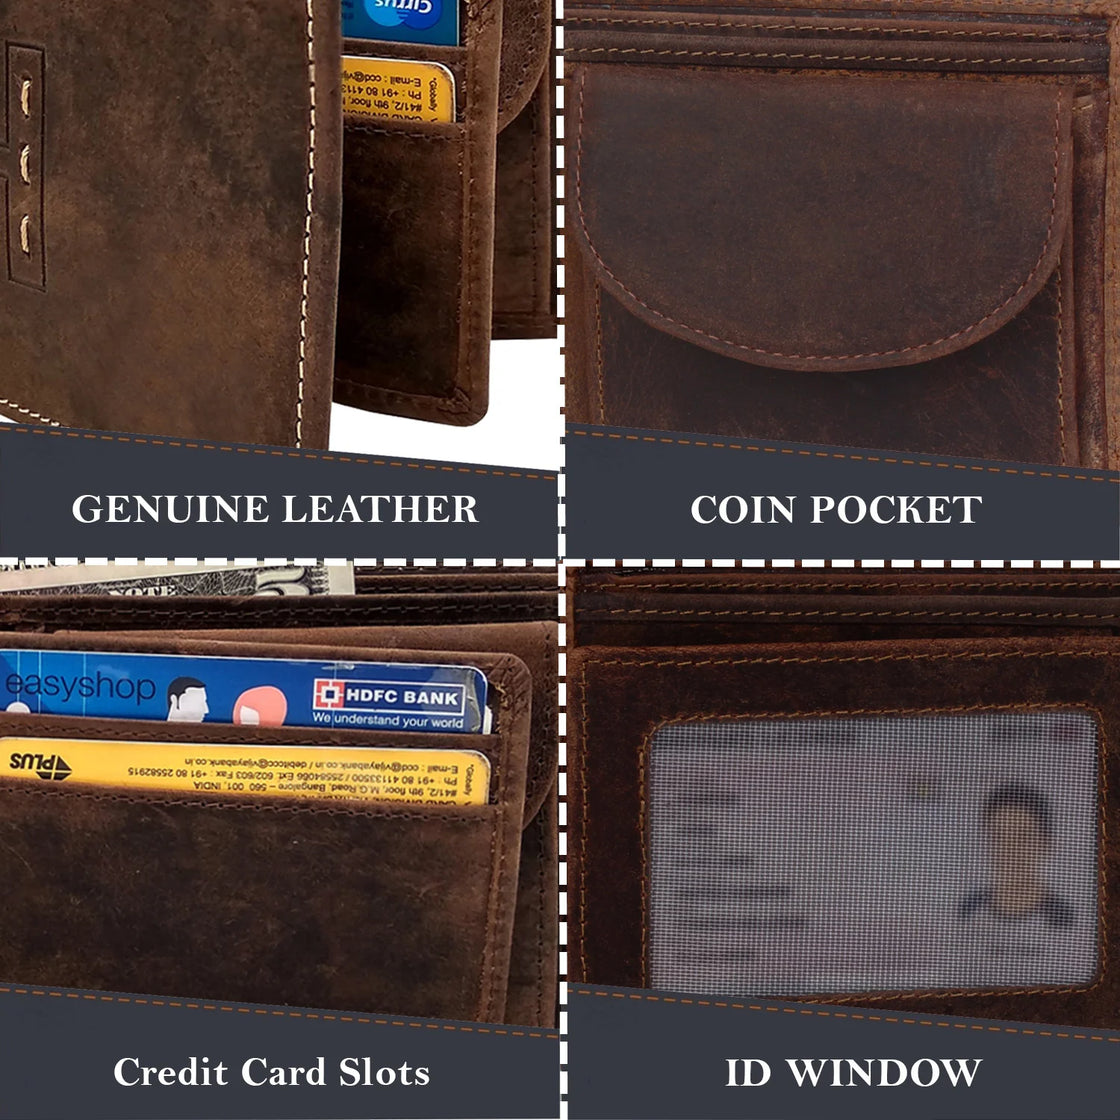 RUSTIC TOWN Mens Wallets - Genuine Leather RFID Wallet for Men with ID Window, Card Slots and Coin Pocket (Large, Dark Brown)